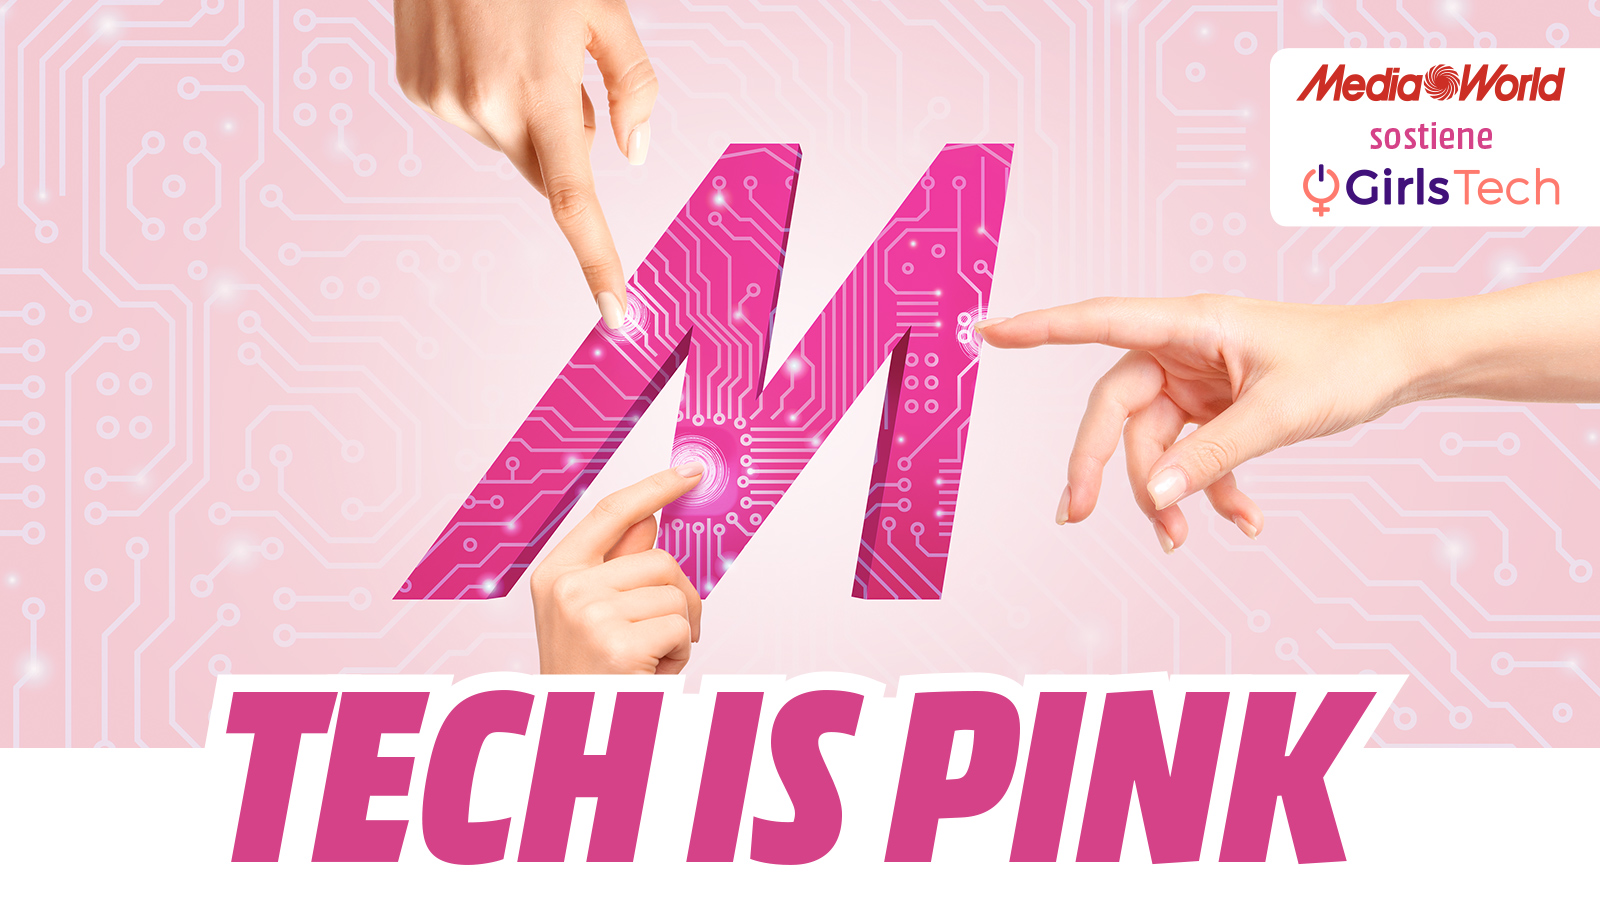 THE PINK SIDE OF TECHNOLOGY: MEDIAWORLD PRESENTS A  NEW TRAINING PROJECT TO PUBLICISE STEM SUBJECTS AMONG ITALIAN GIRLS